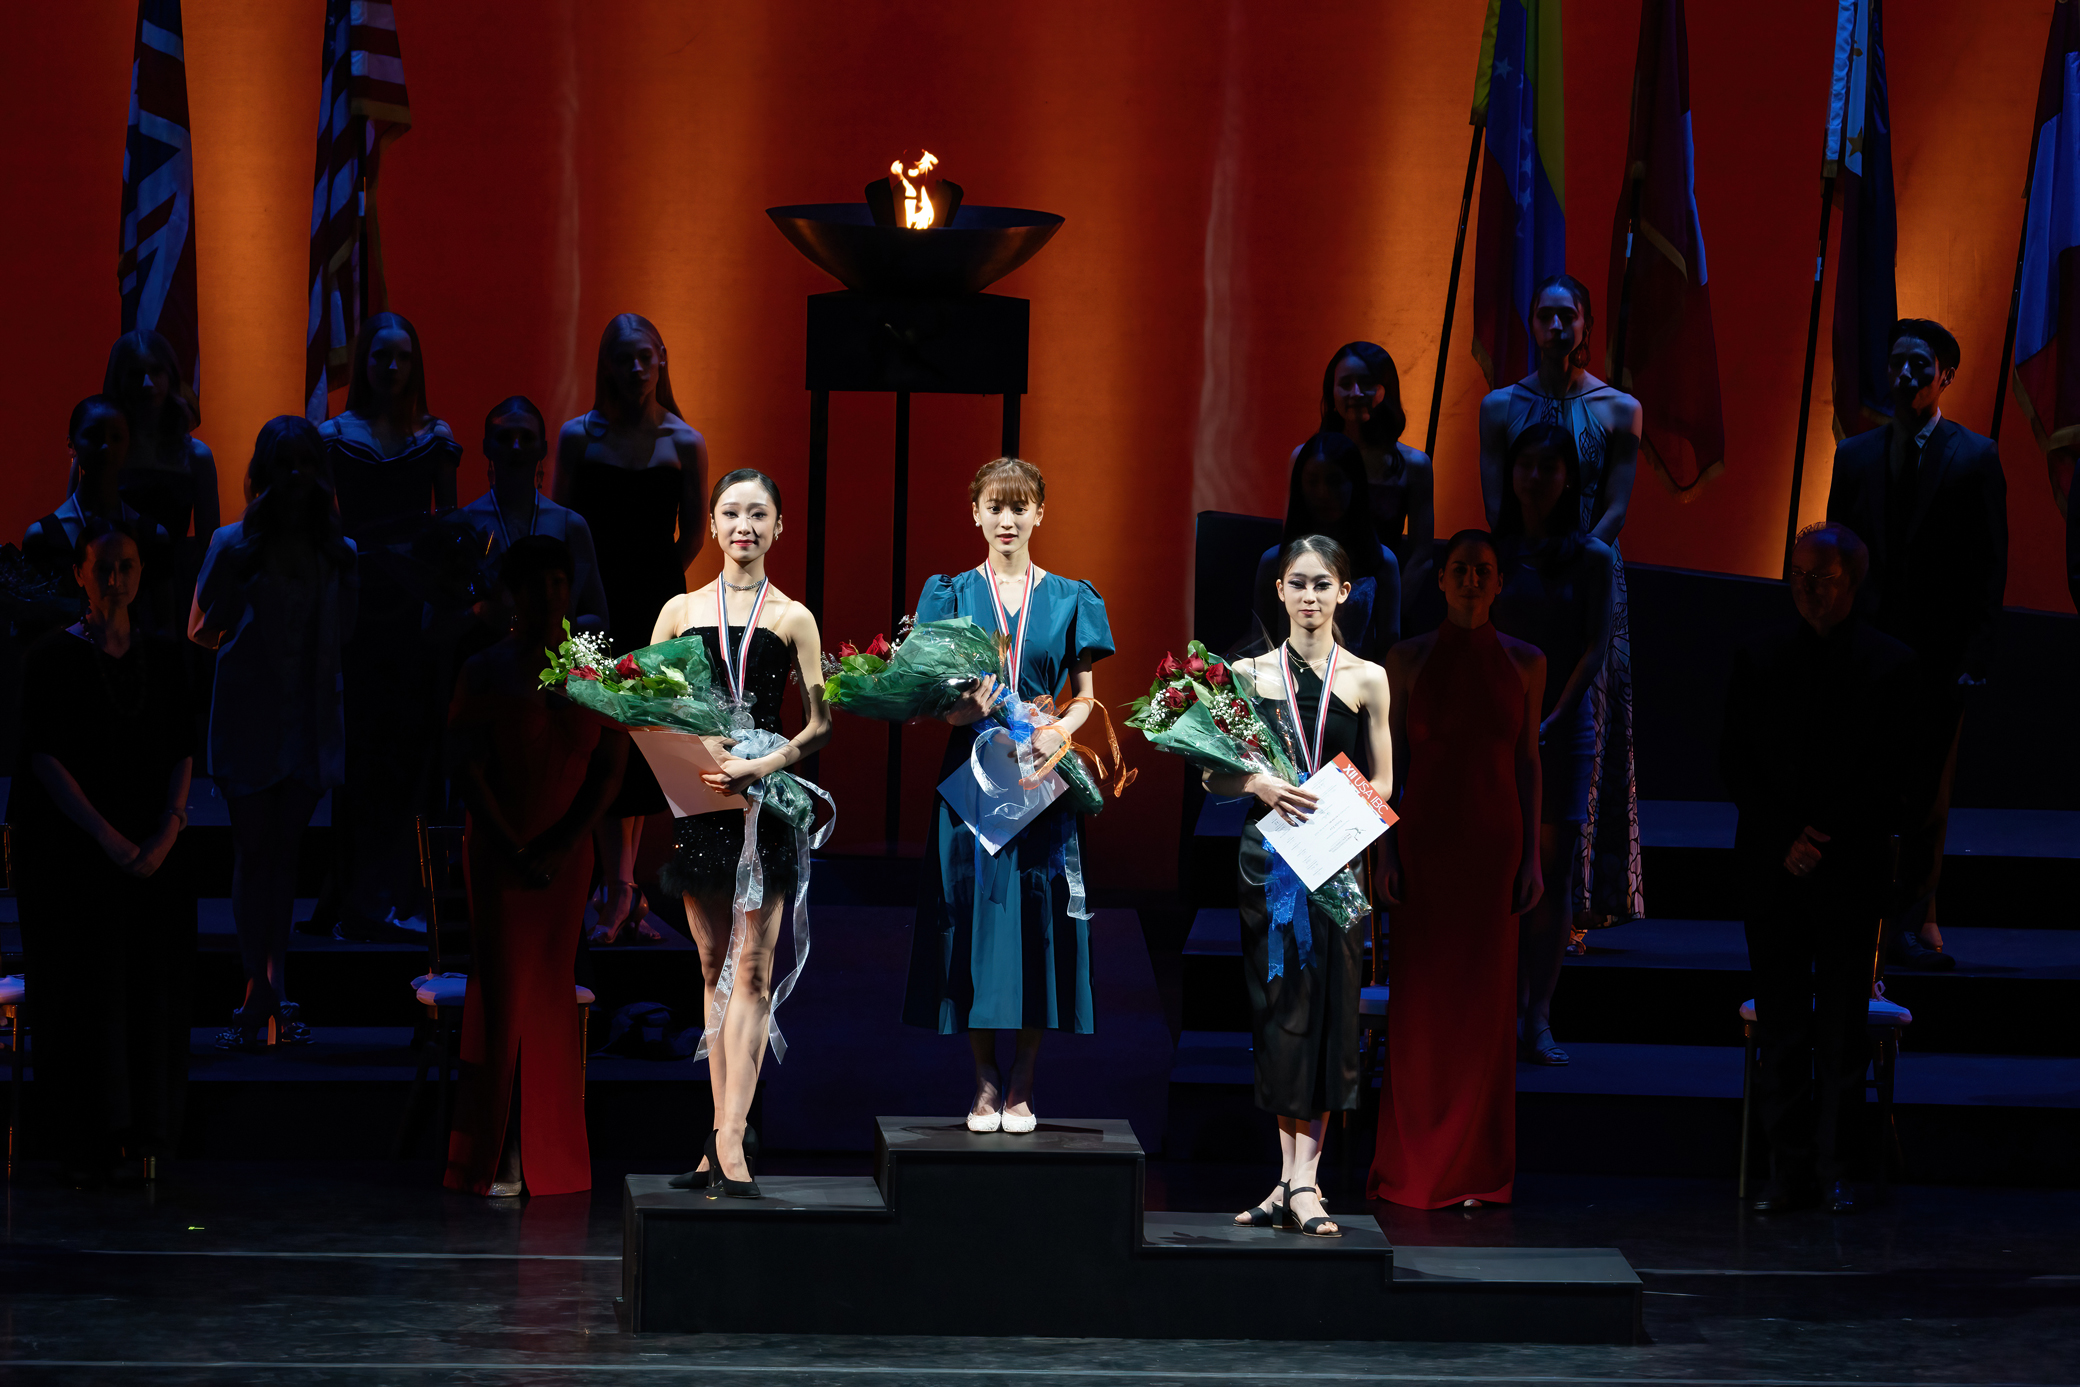 Three young women stand on an Olympic-style podium, wearing formal dresses and high heels and carrying bouquets of flowers. They each wear a medal around their neck.